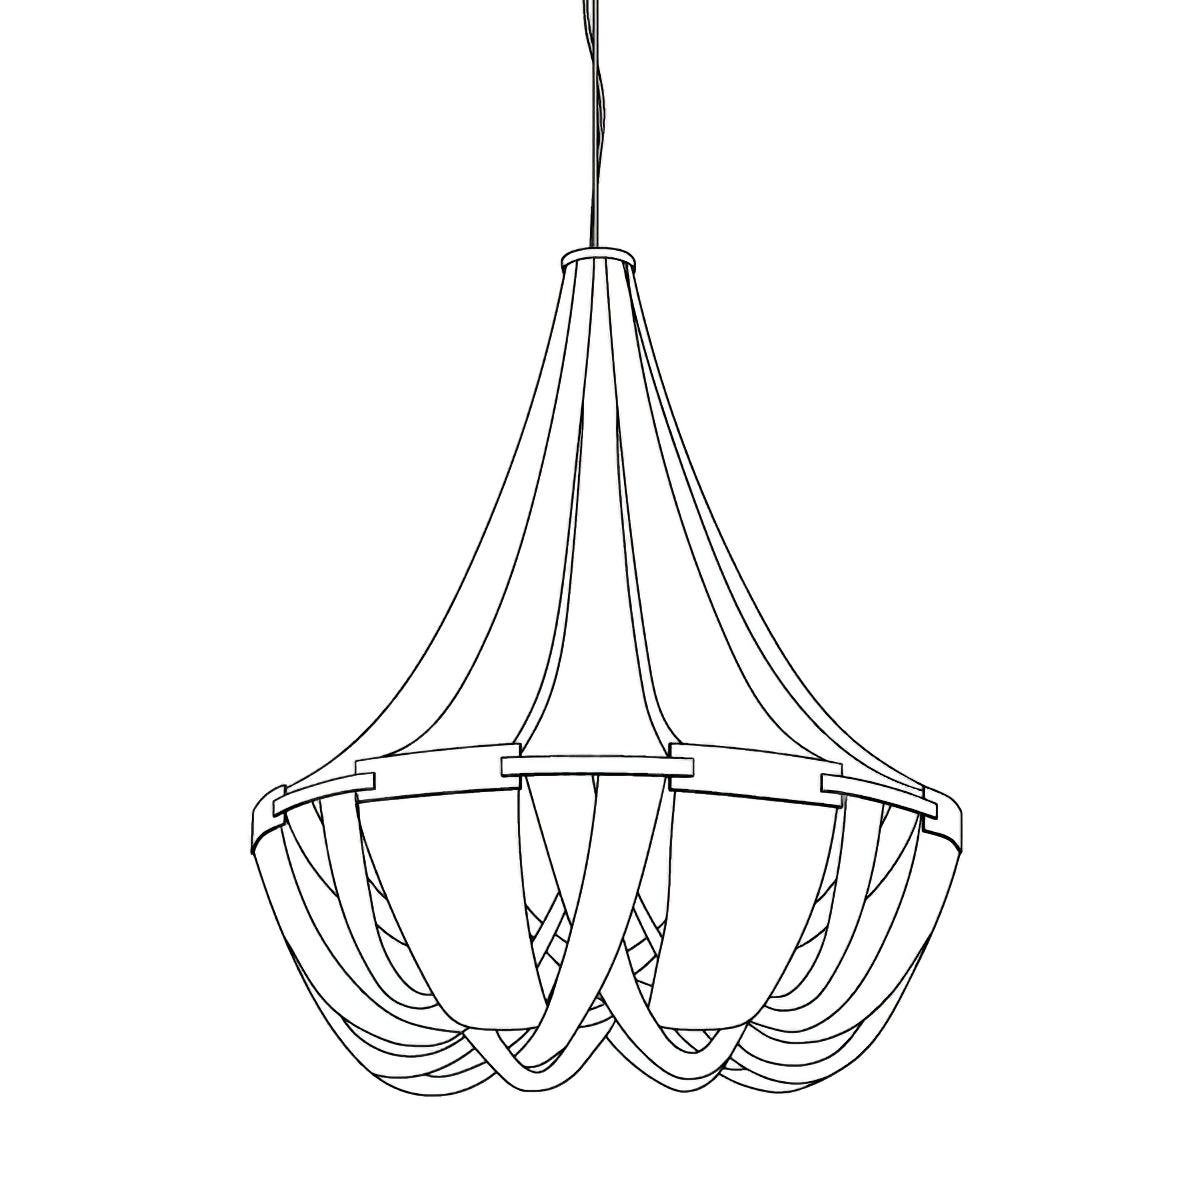 Aluminum Chain Chandelier with Tassel Detail, Diameter 47.2 inches x Height 59 inches (120cm x 150cm), Silver Finish